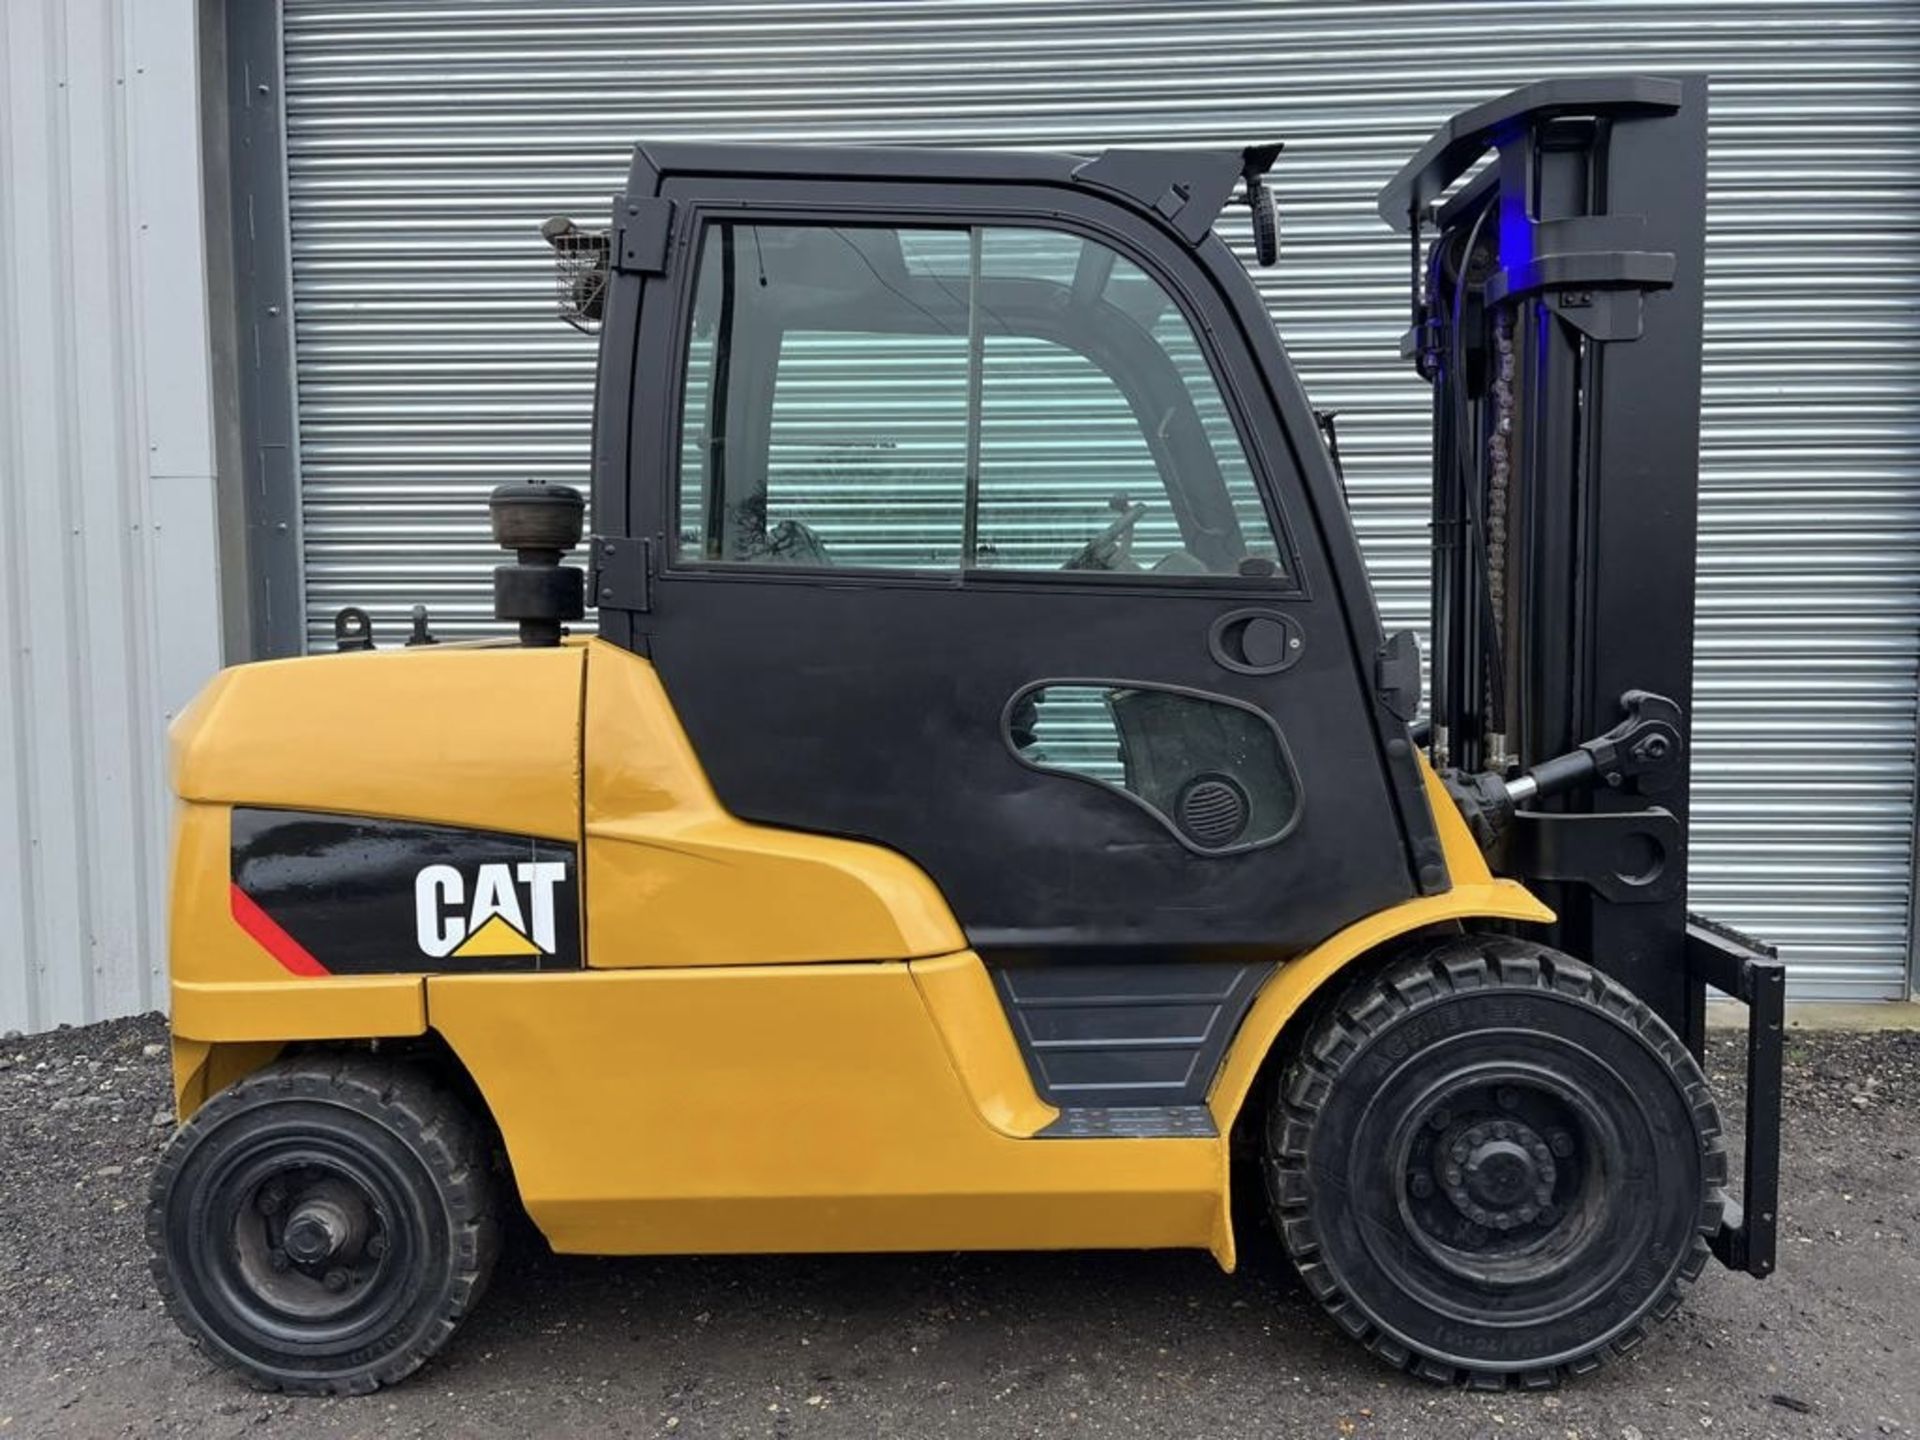 2013 - CATERPILLAR, 5 Tonne Diesel Forklift (New Front Tyres) - Image 5 of 10